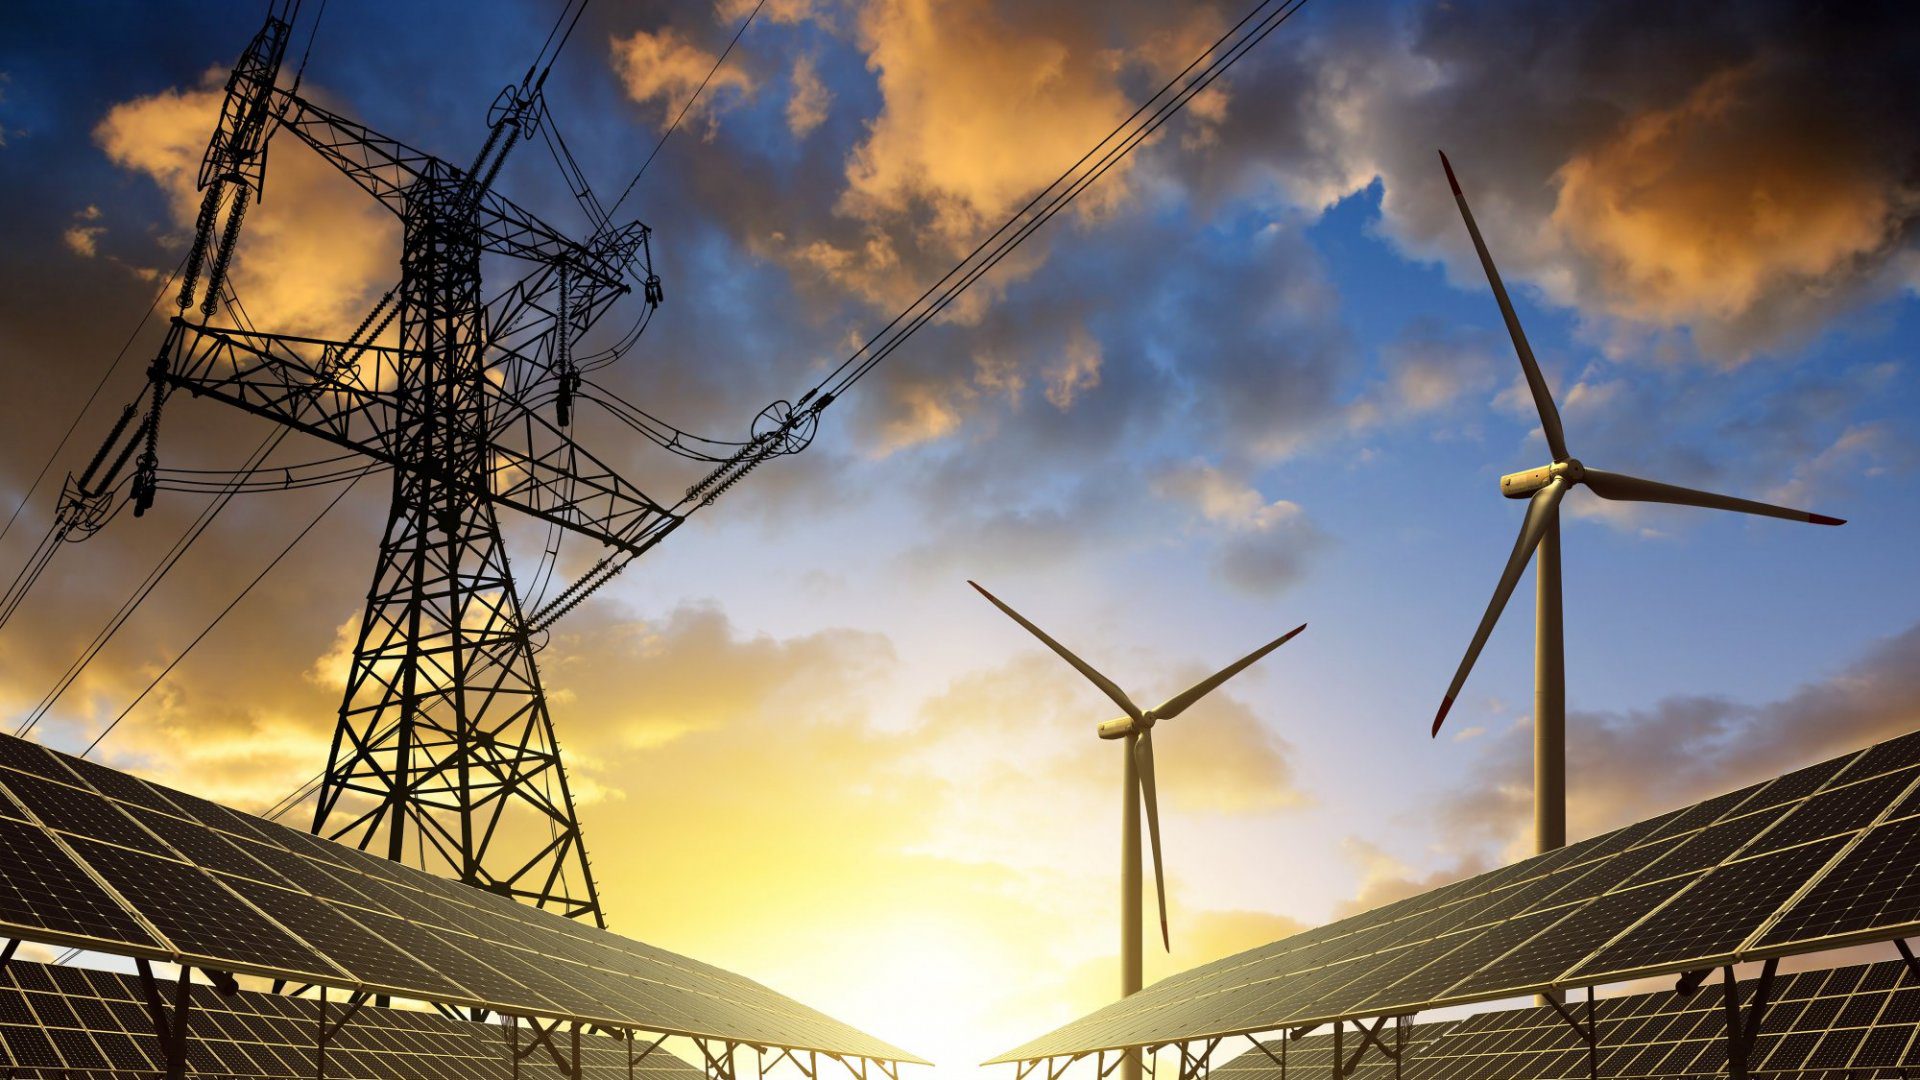 What are the main challenges of Energy industry?